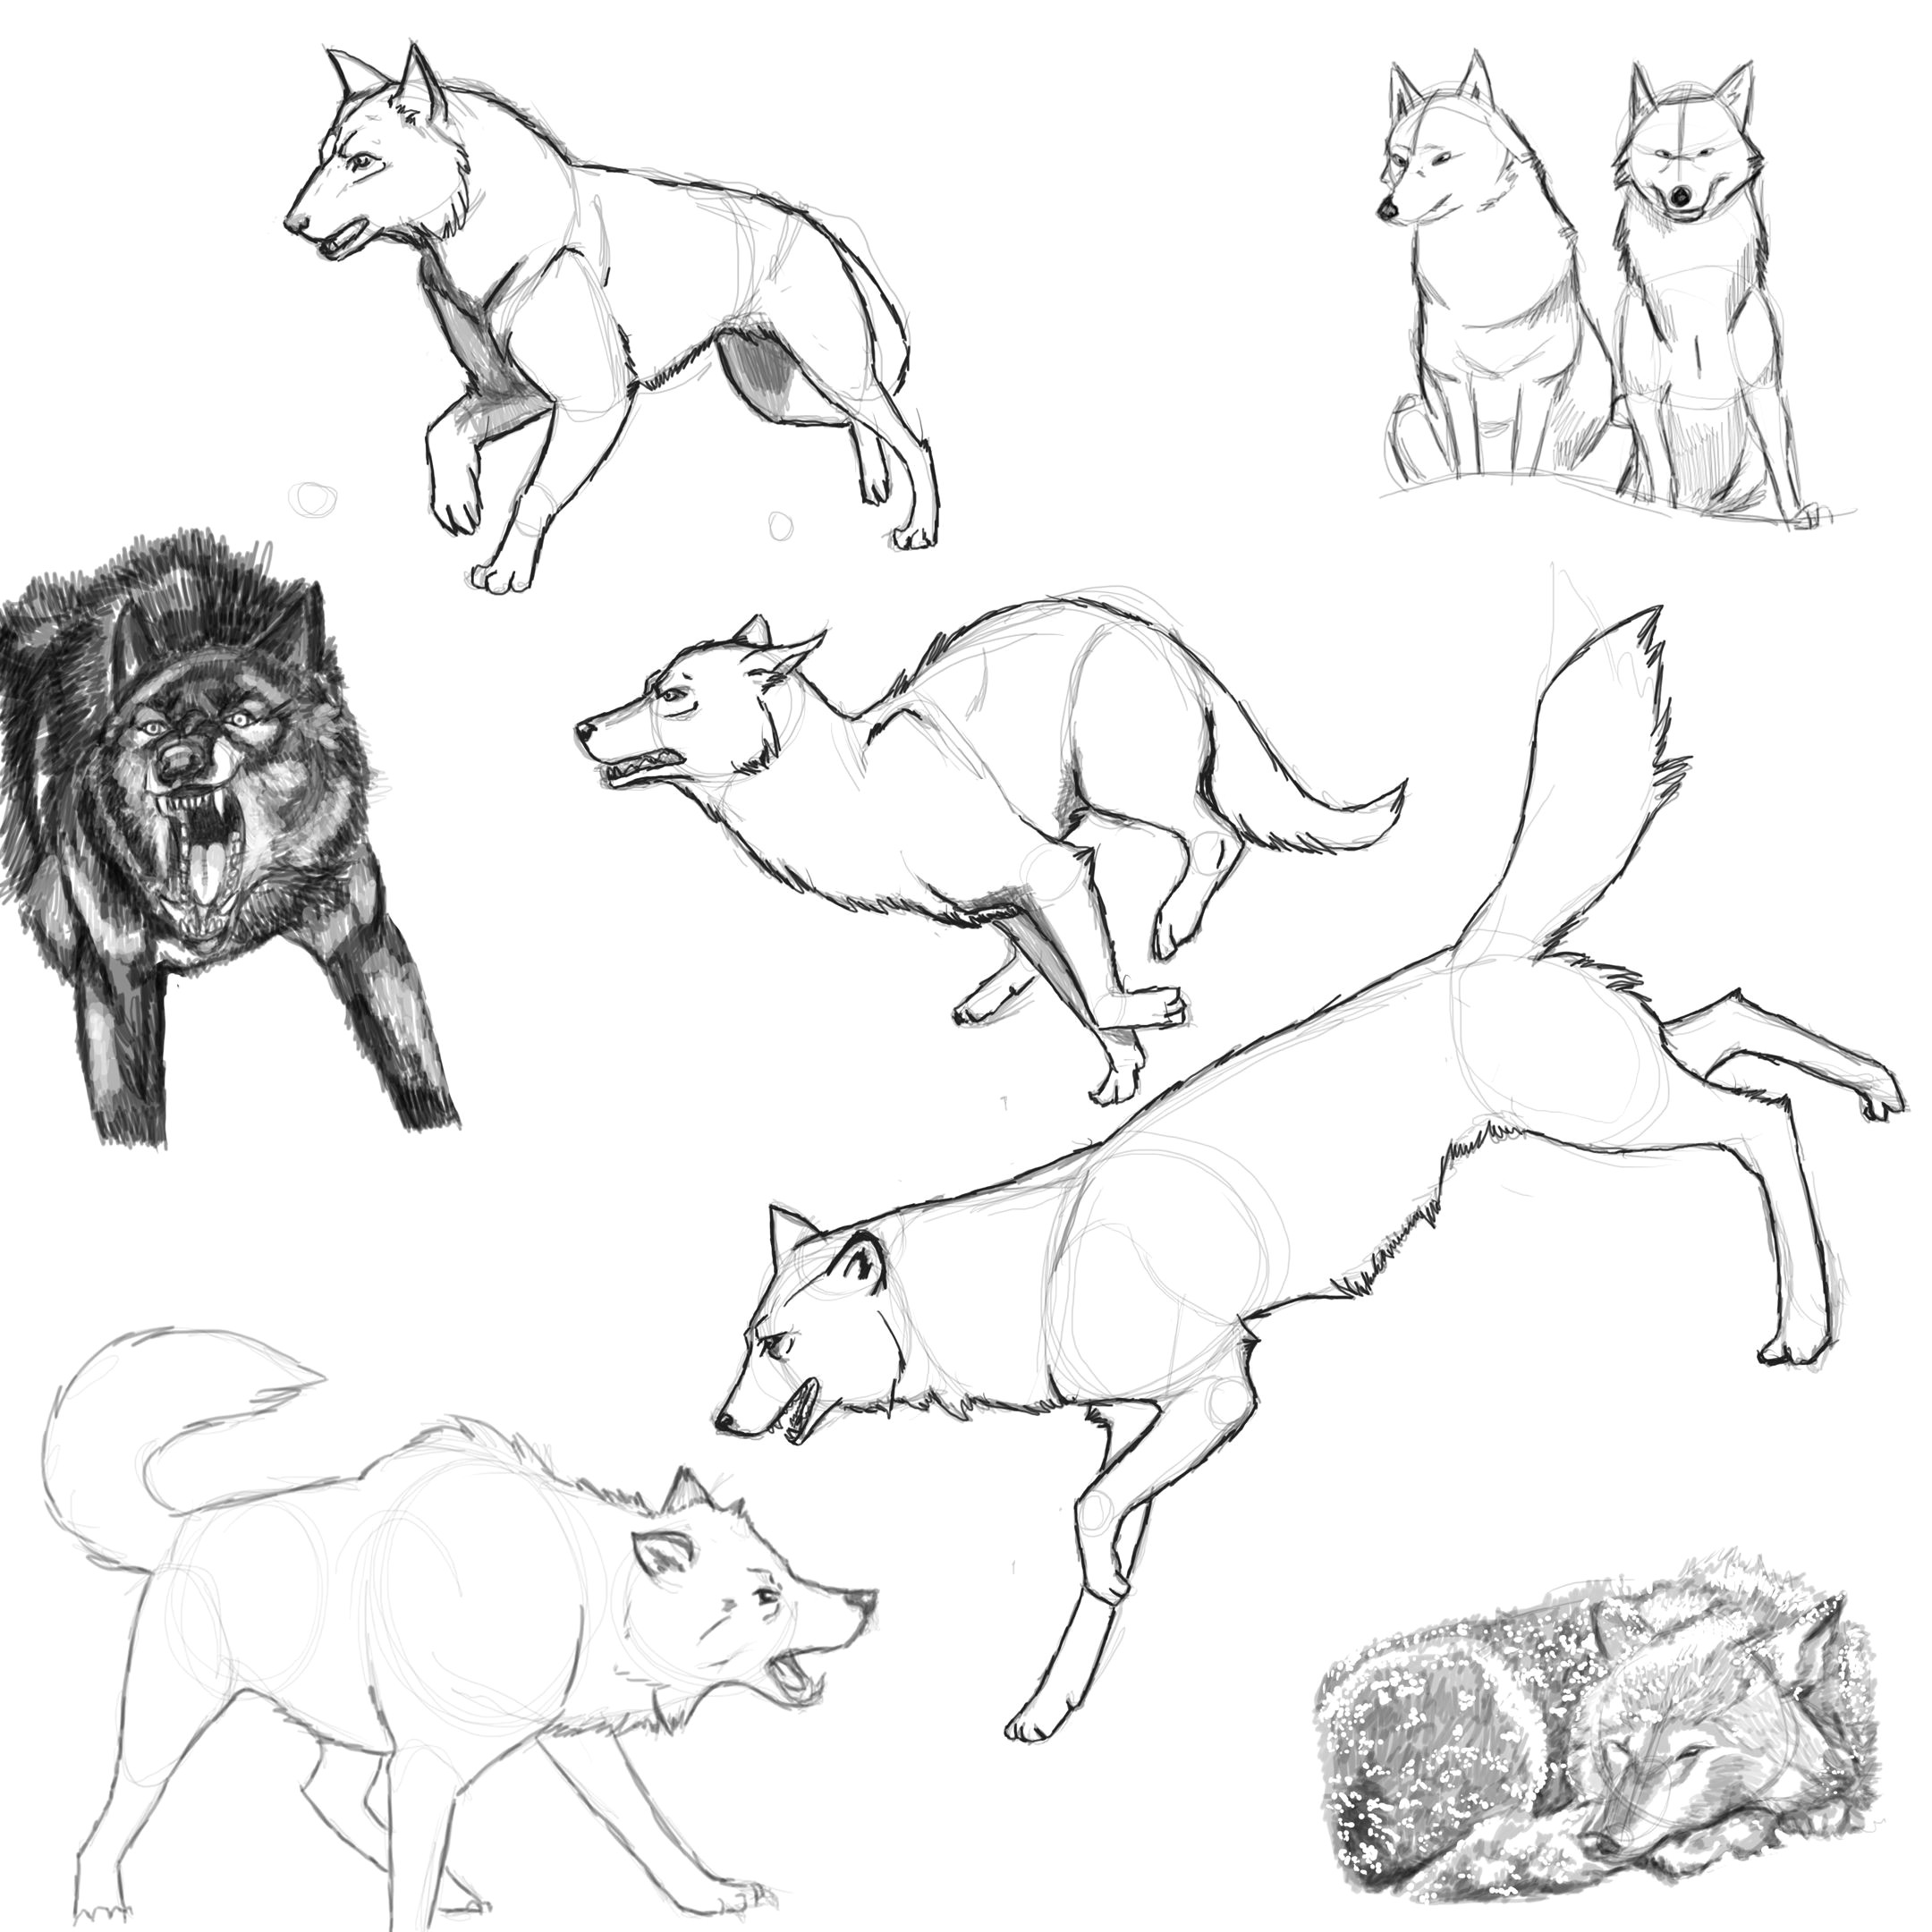 drawing tools cat drawing drawing techniques wolf poses animal sketches animal